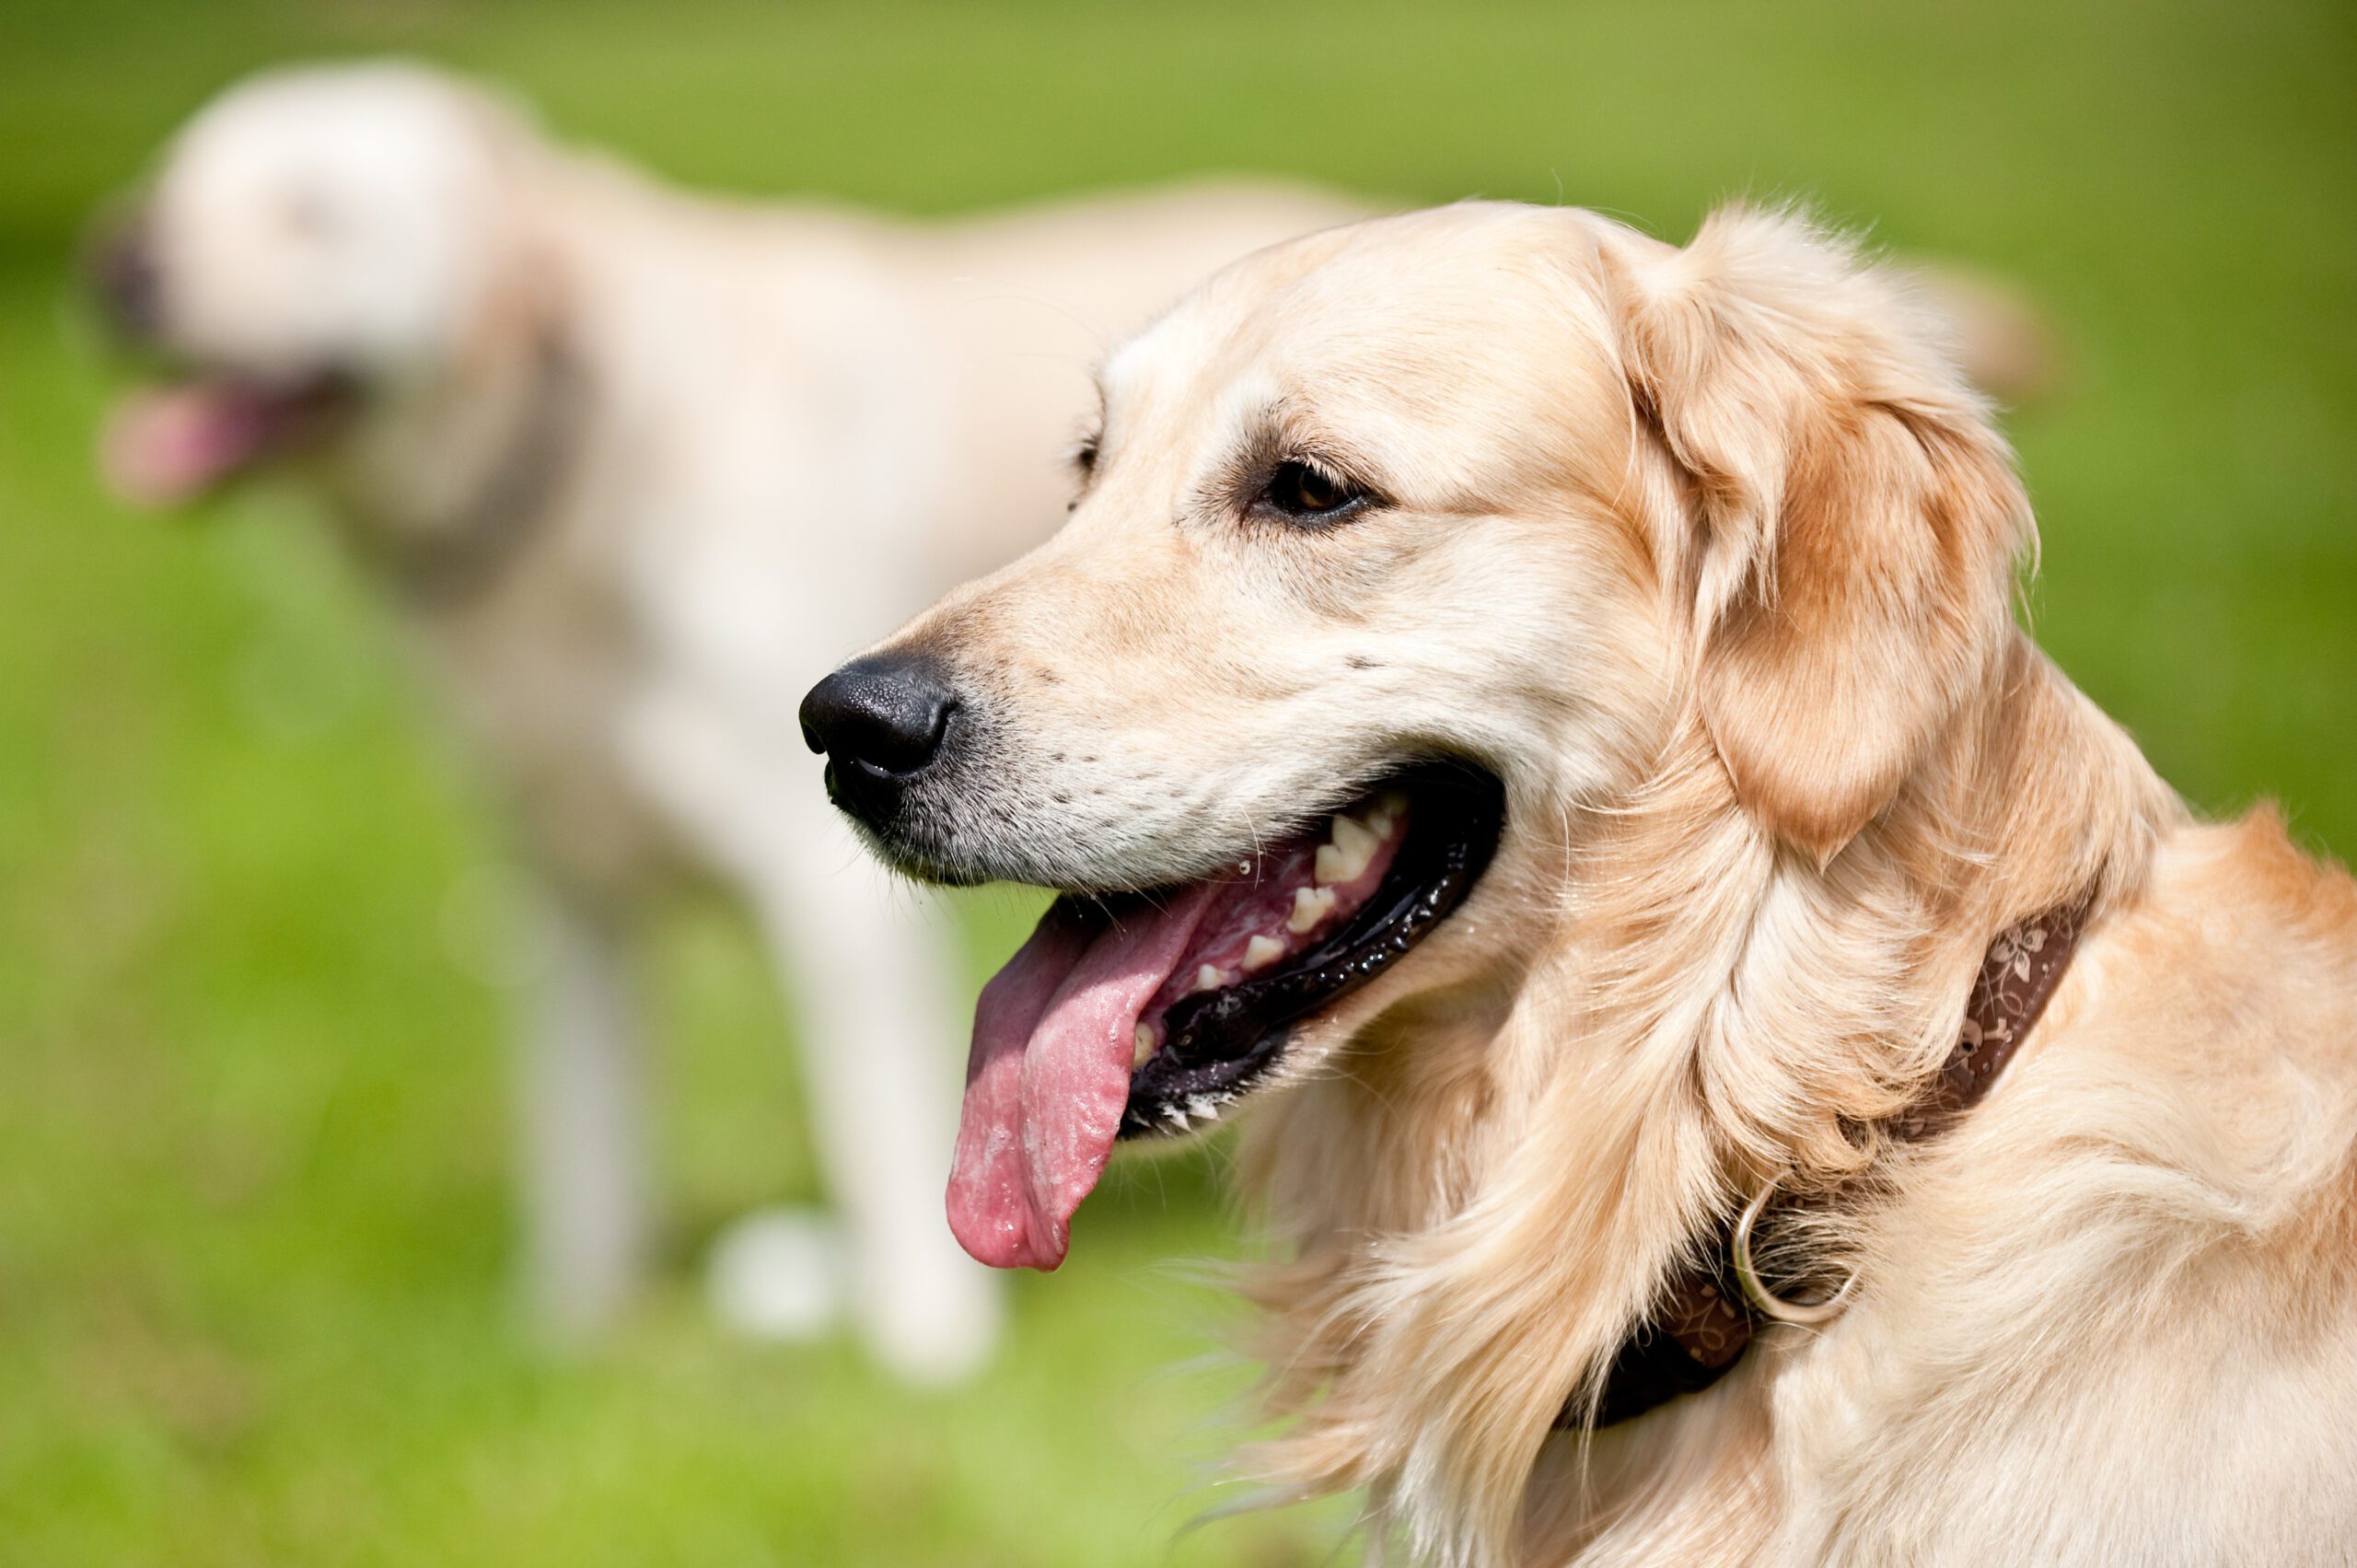 Golden Retrievers are a common dog breeds that get along very well together and with other dog breeds